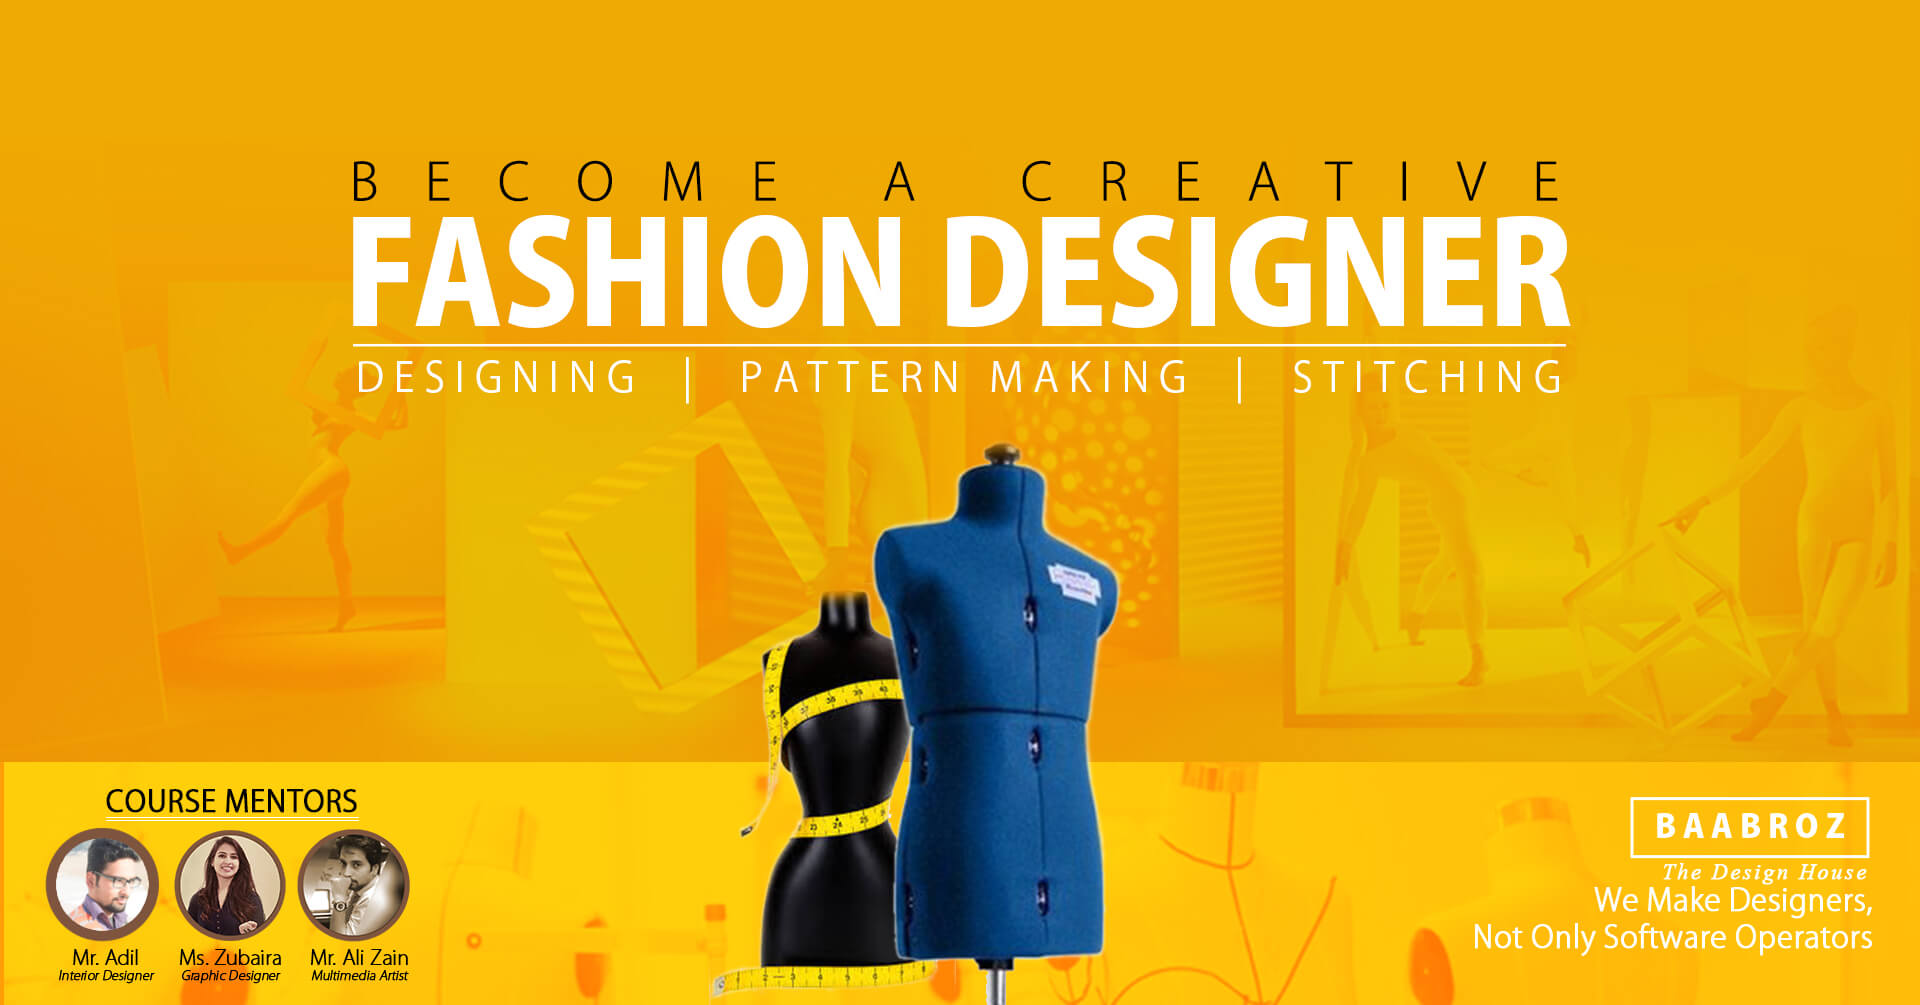 Why get a Fashion Designing Course? by GIFT Design Academy - Issuu